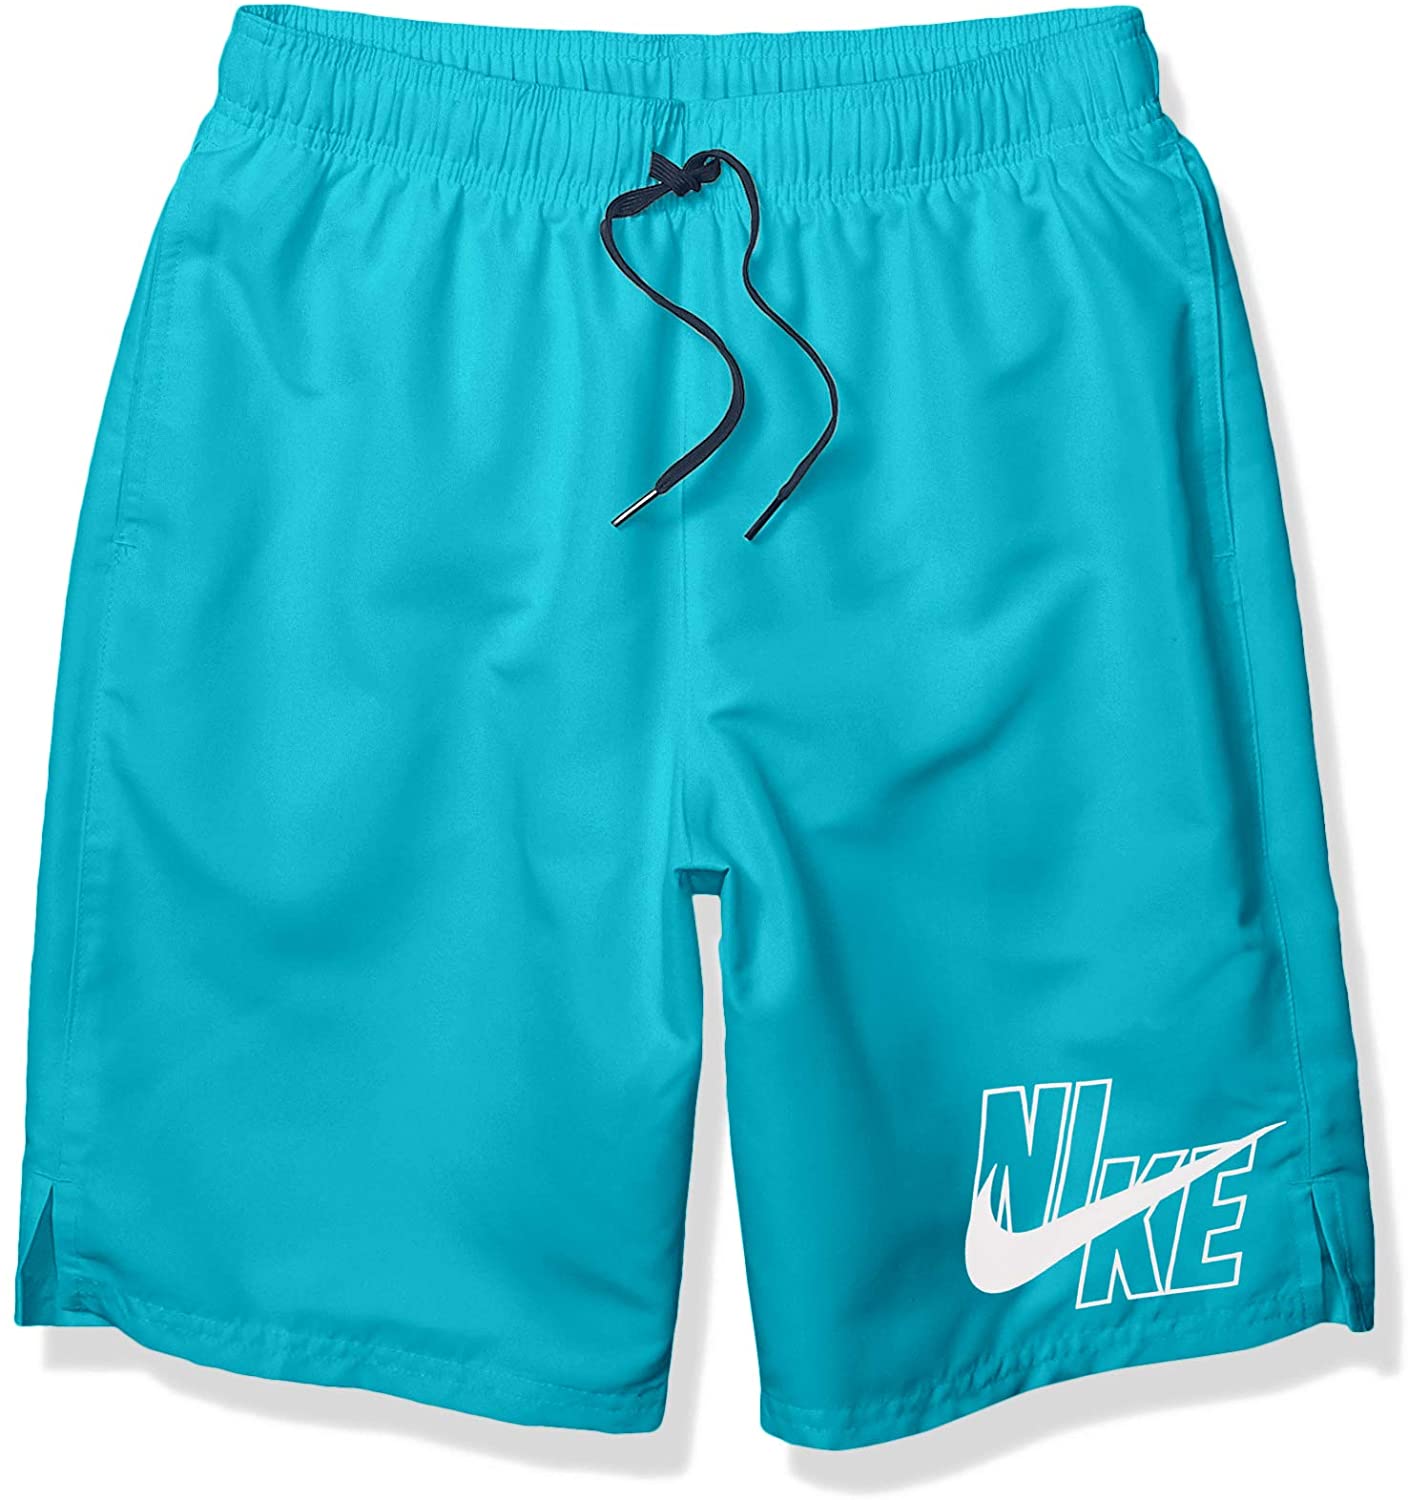 Men's Nike Logo Solid Lap 9" Volley Short Swim Trunk in Oracle Aqua color from the front